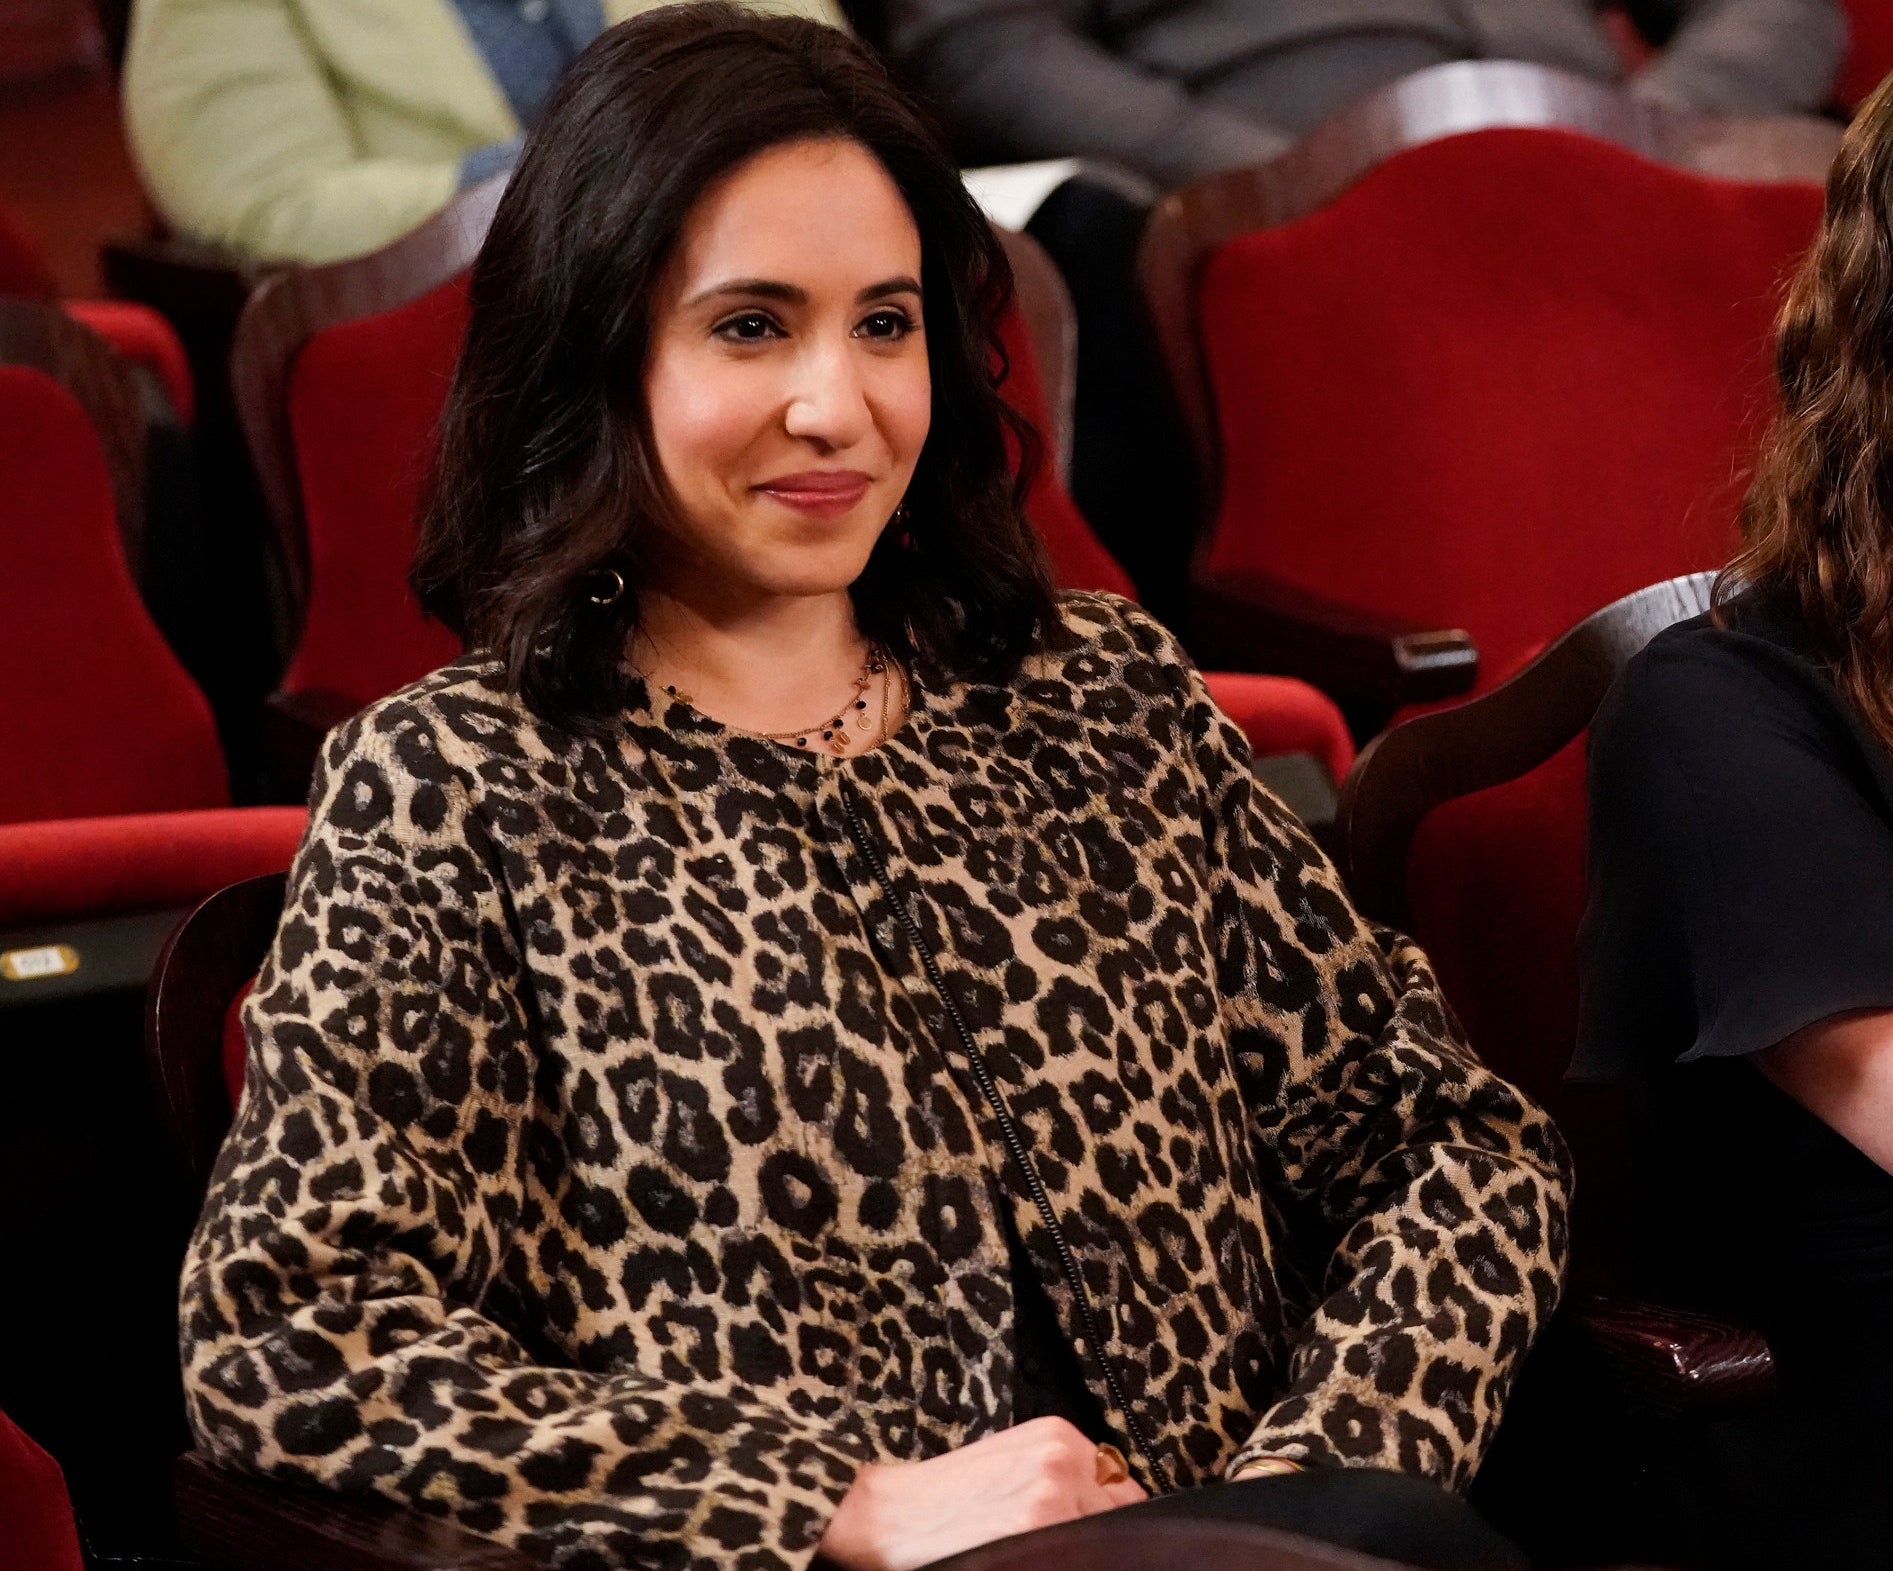 Valencia sitting in a theater seat and smiling while wearing a leopard-print top